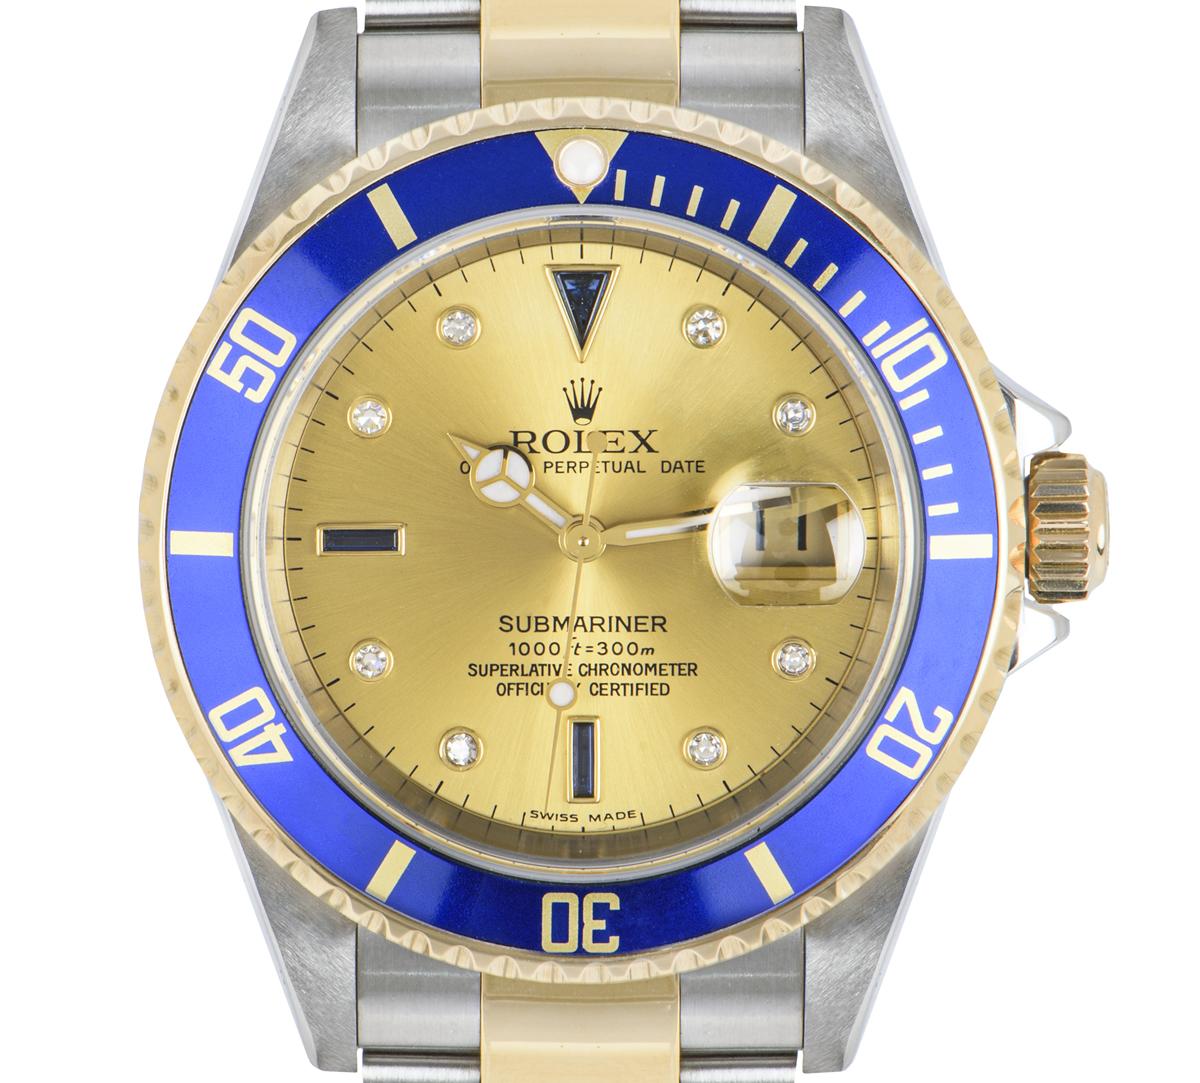 A men's 40mm Submariner in steel and yellow gold by Rolex. Featuring a champagne serti dial set with 8 round brilliant cut diamonds and 3 sapphires. Complimenting the dial is a yellow gold uni-directional rotating bezel with a blue bezel insert.